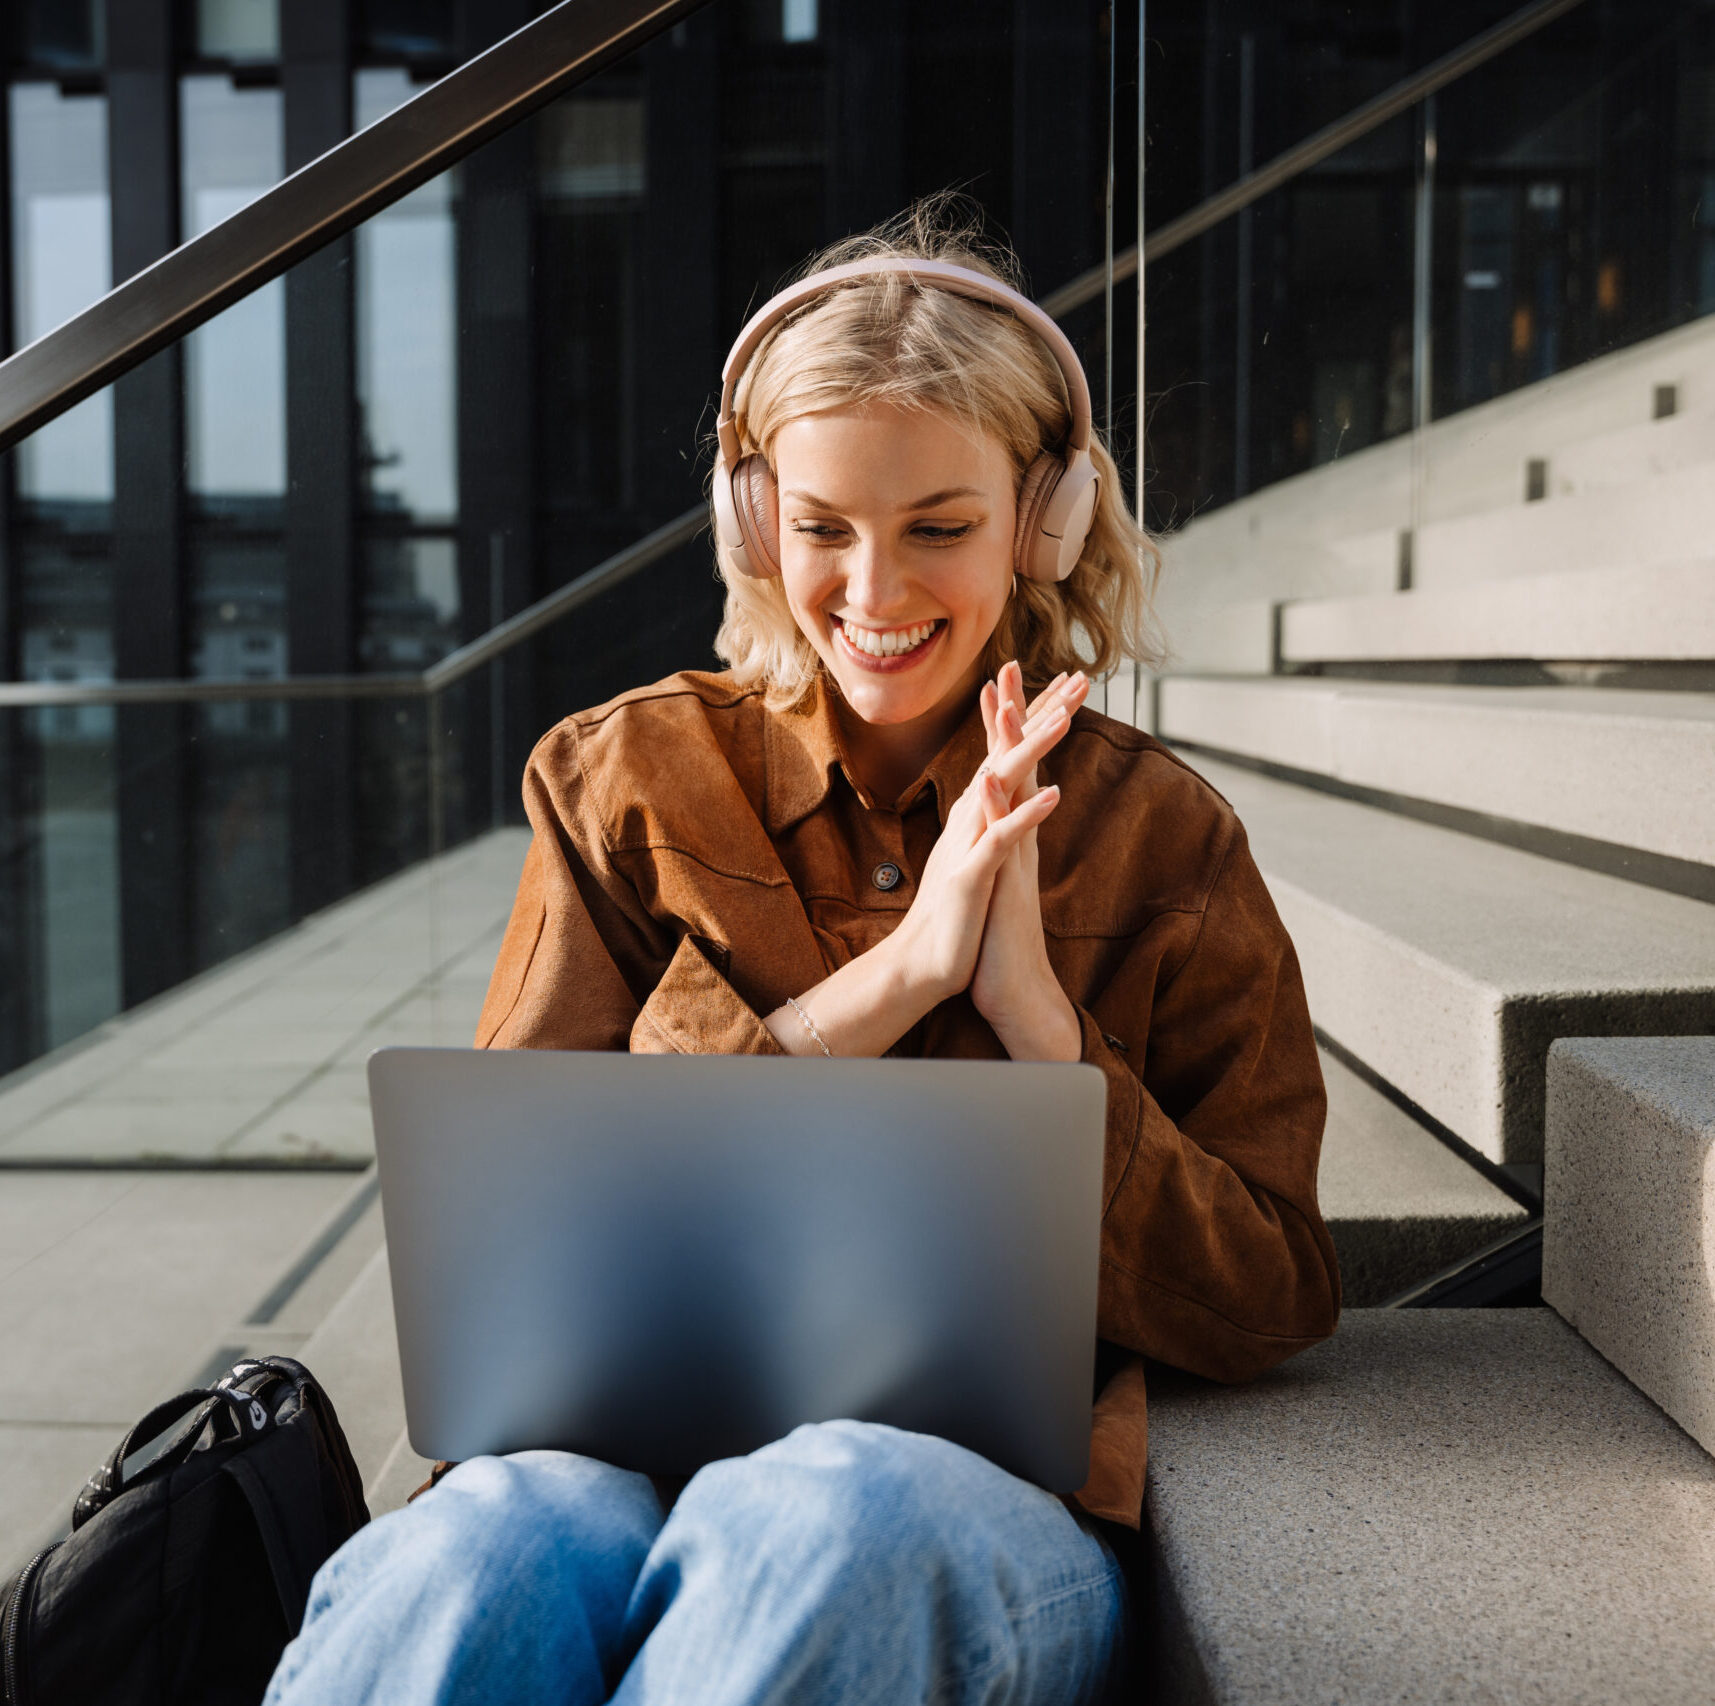 Young smiling blonde woman in wireless headphones making video call via laptop and gesturing while sitting on stairs outdoors